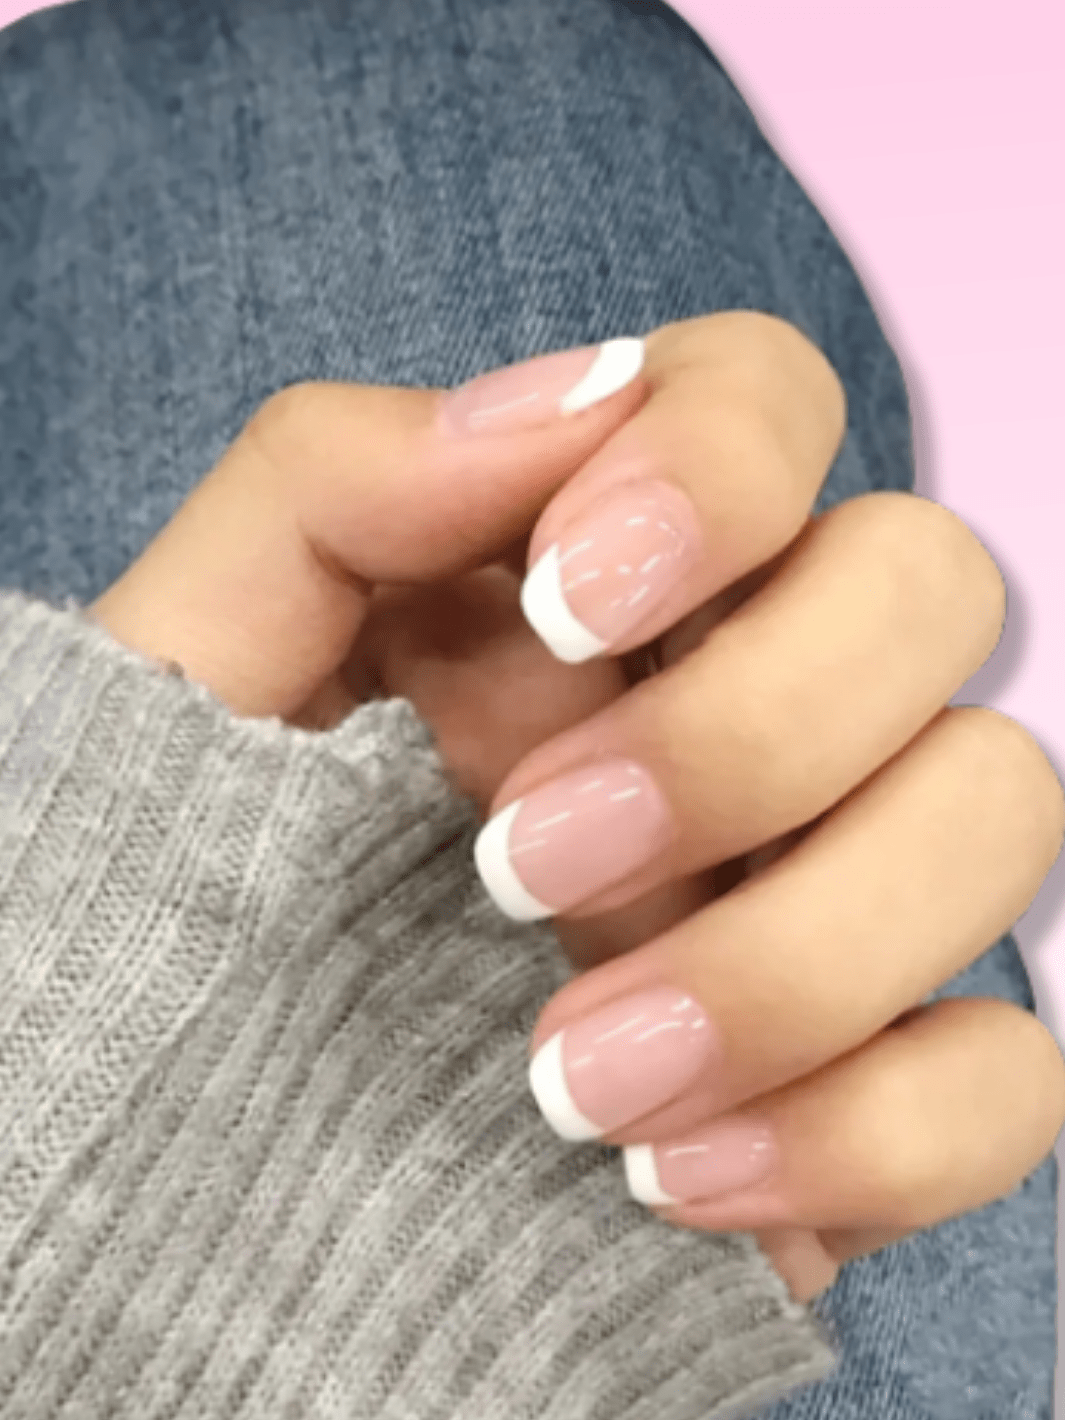 Faux ongles court naturel Nail Chic